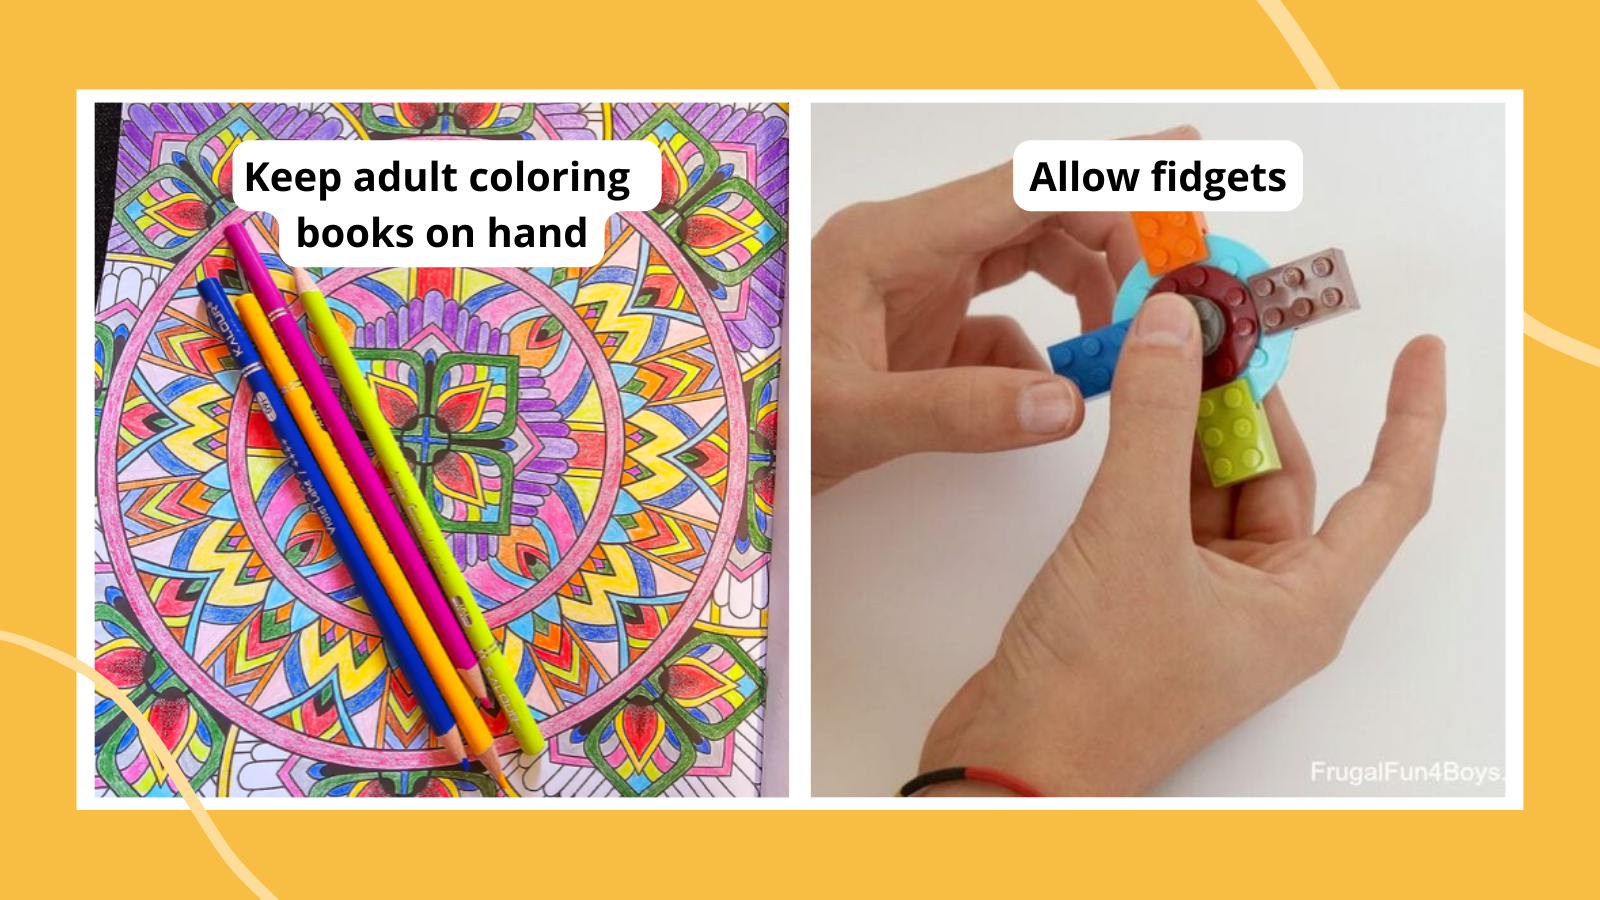 Examples of mental health activities for teens such as adult coloring books and fidgets.